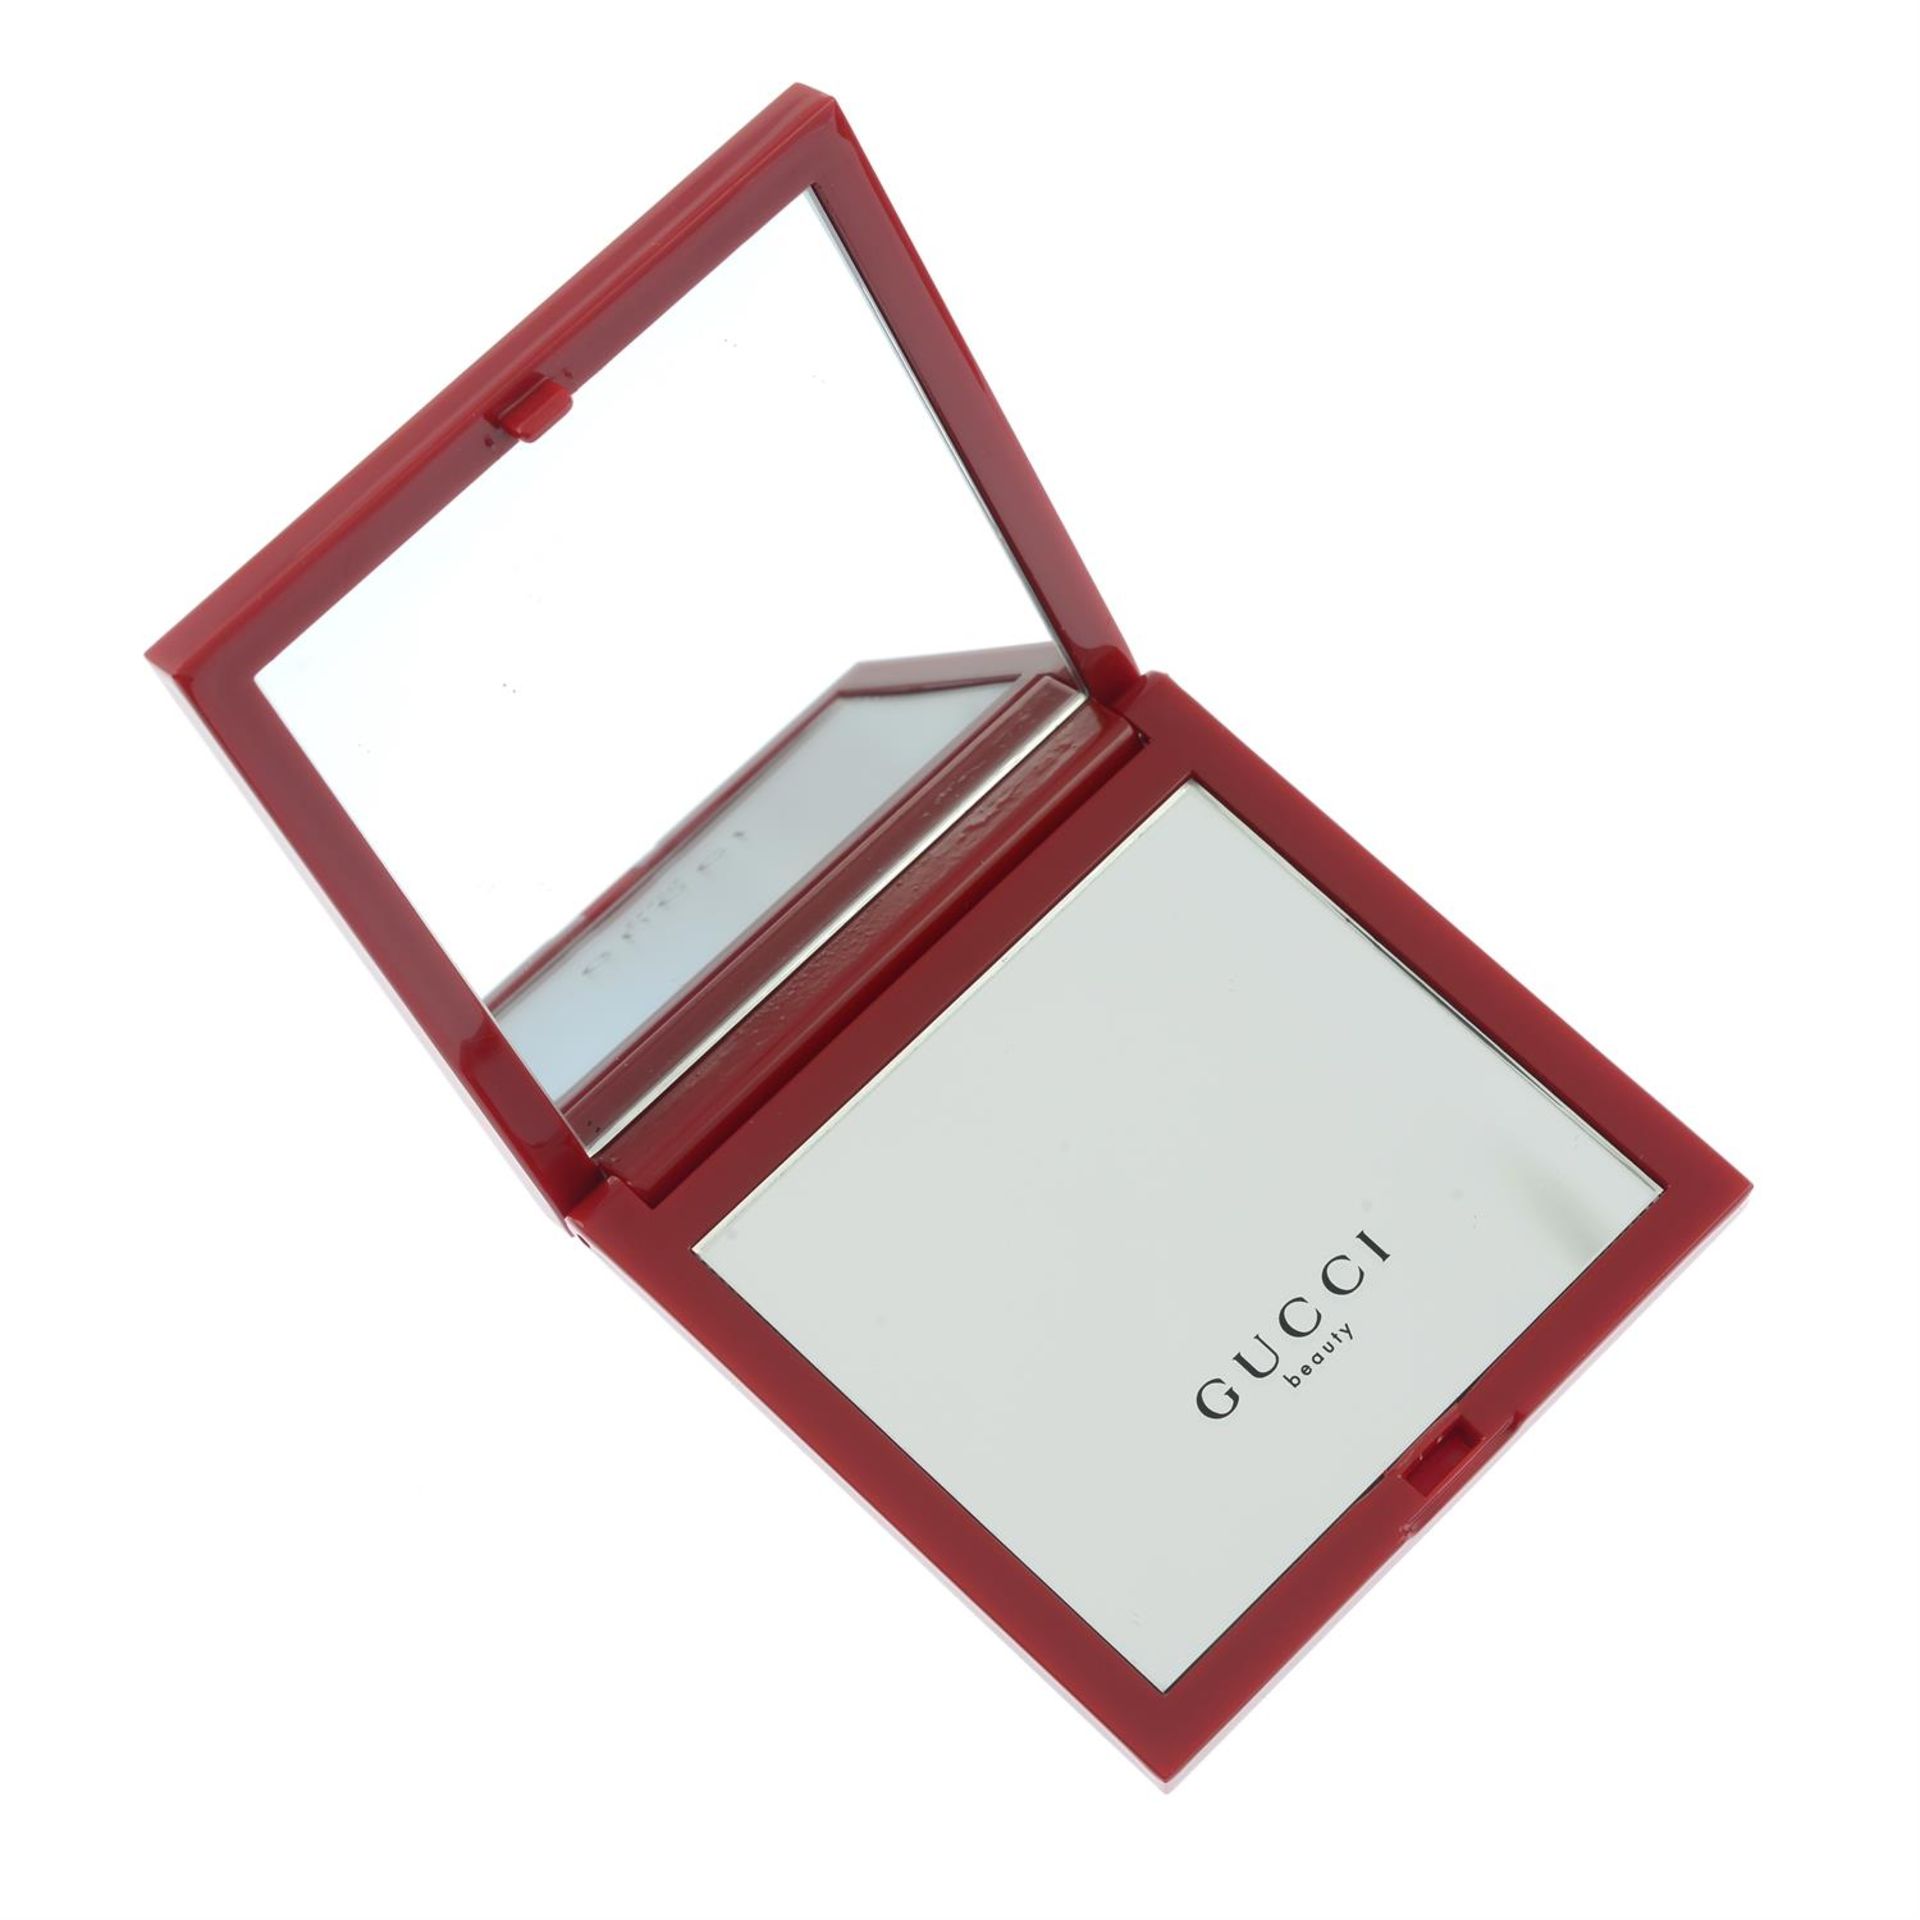 GUCCI - a red compact mirror. - Image 2 of 3